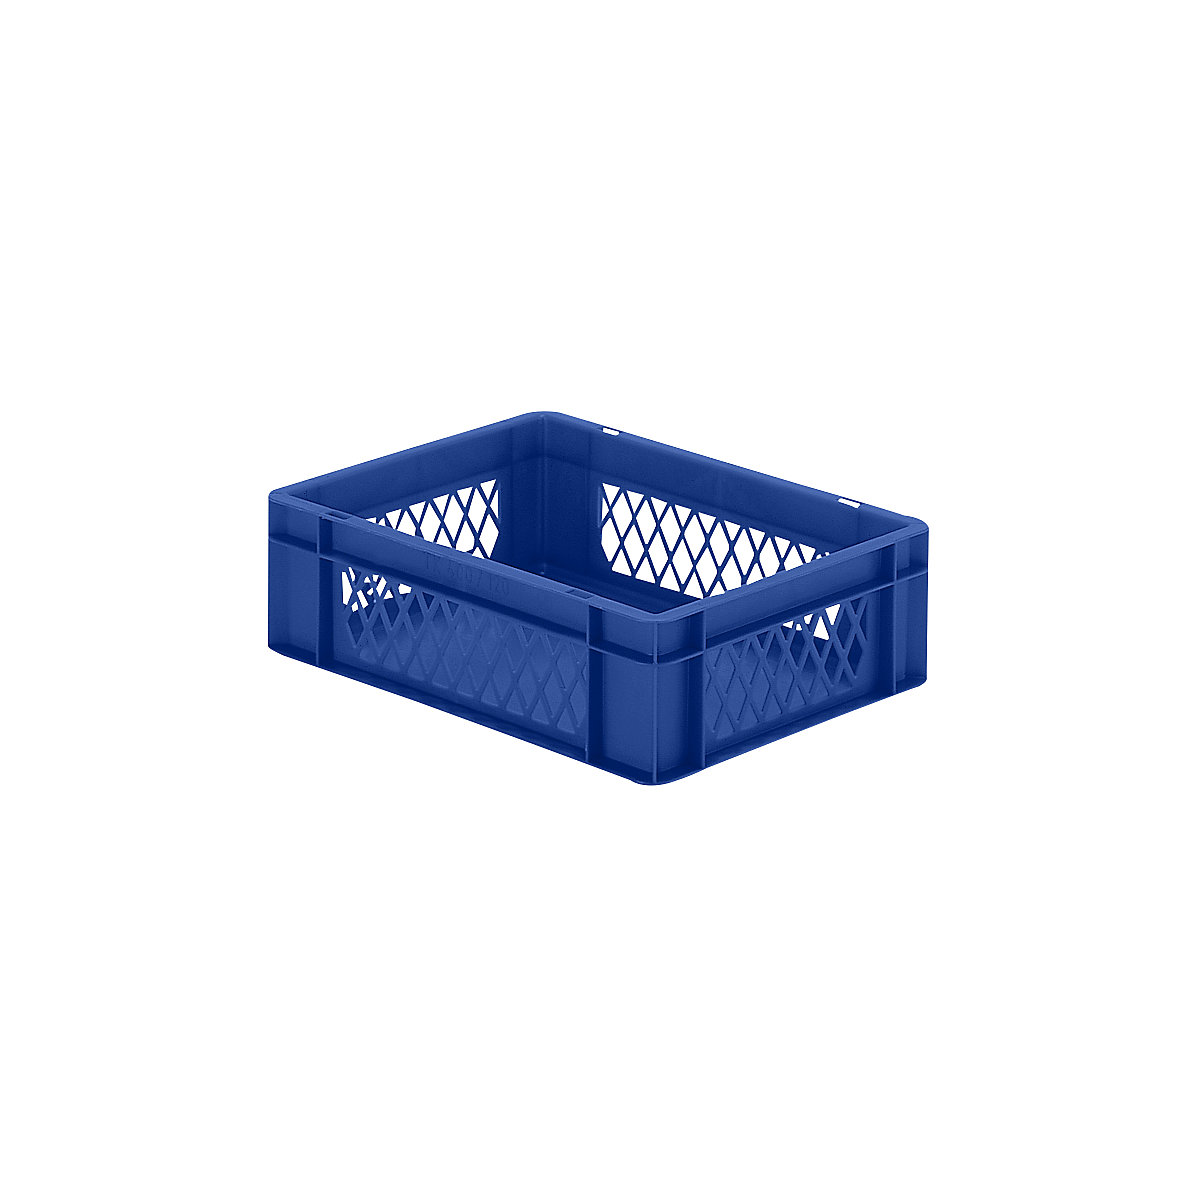 Euro stacking container, perforated walls, closed base, LxWxH 400 x 300 x 120 mm, blue, pack of 5